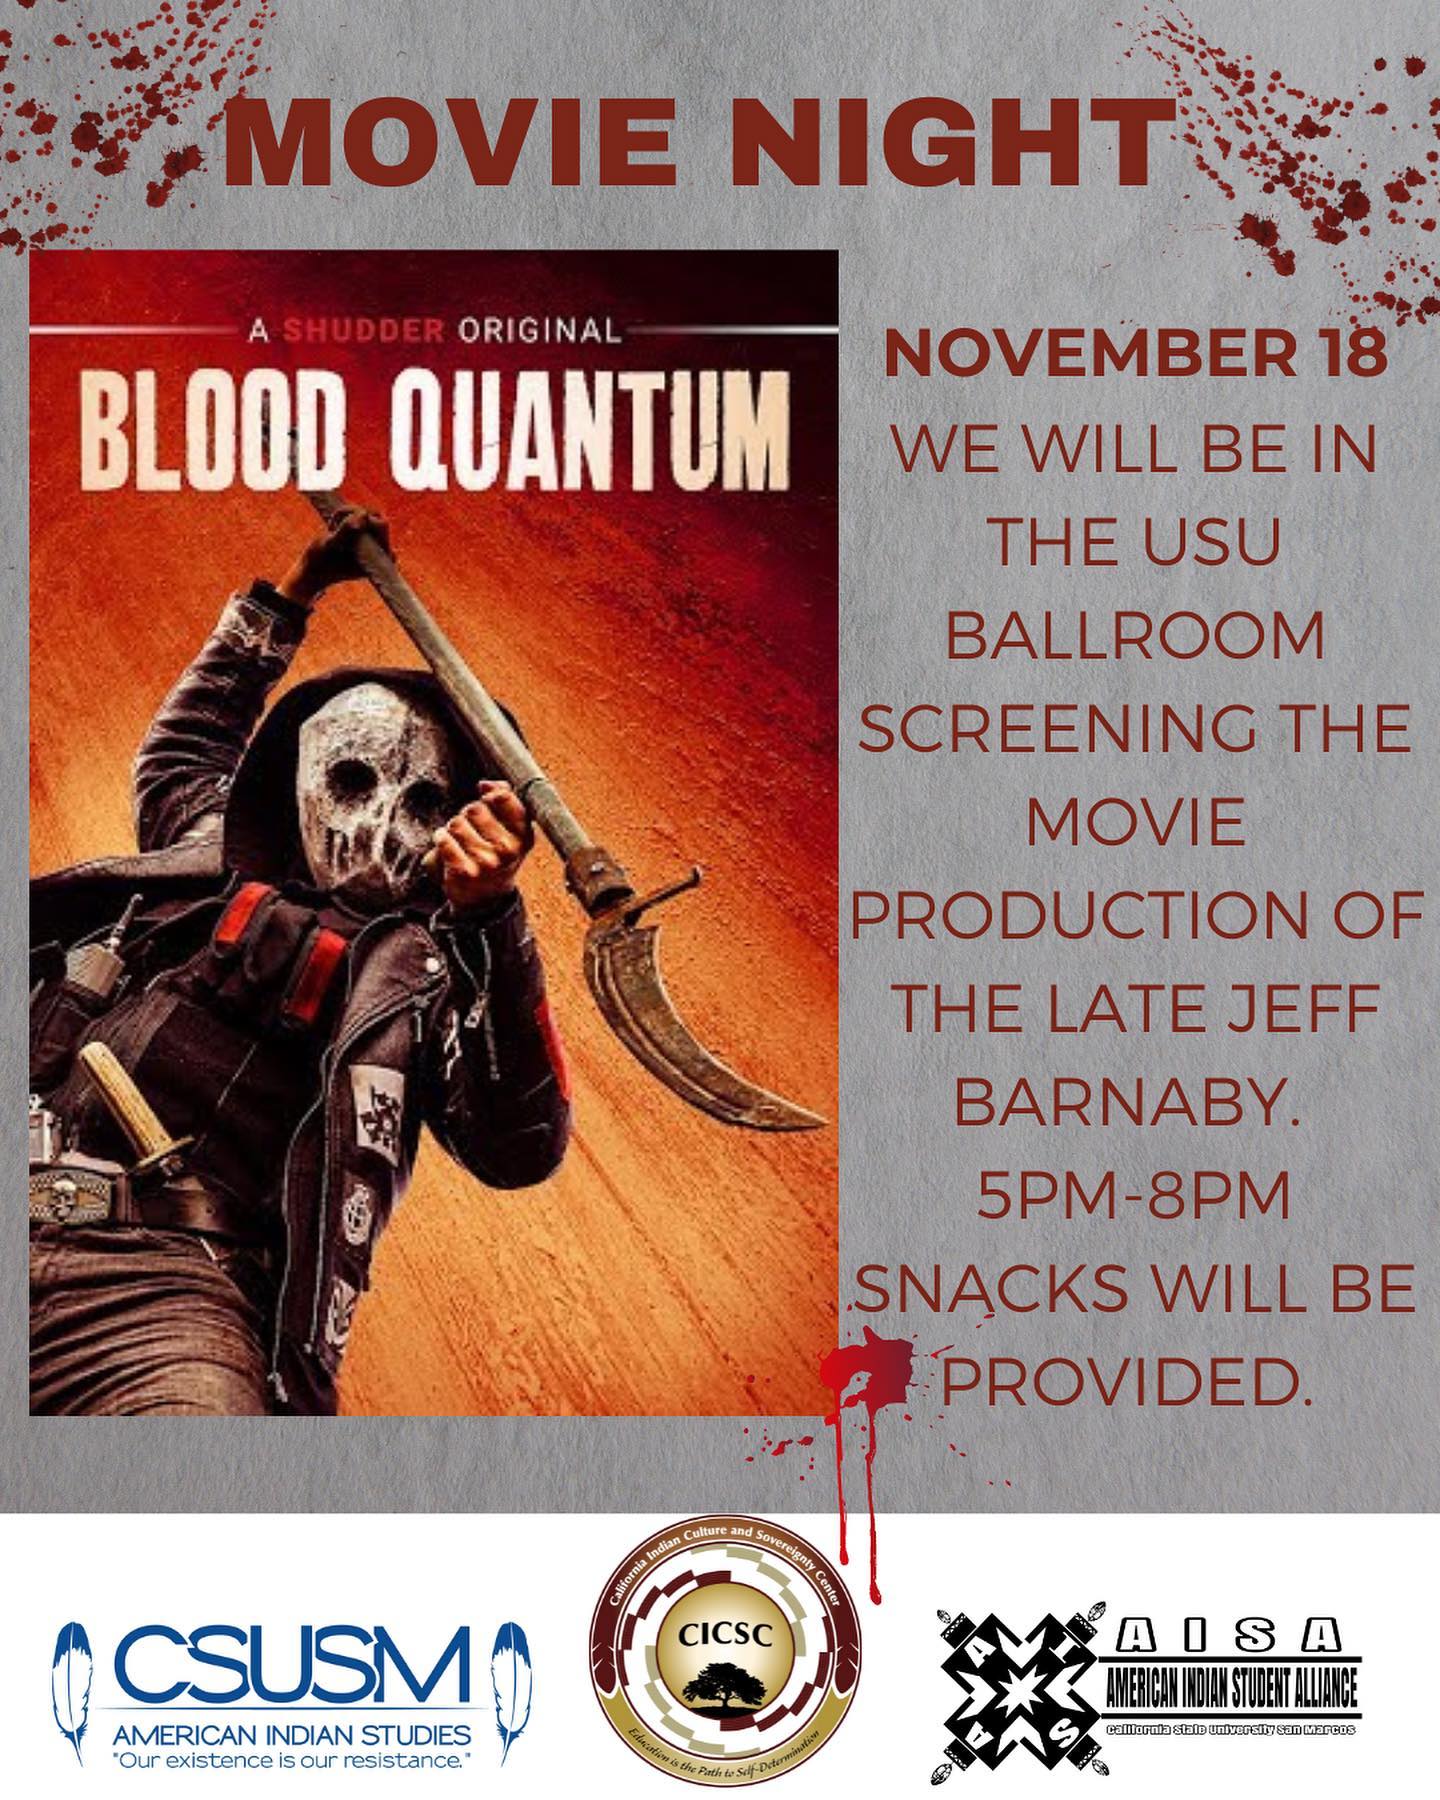 Blood Quantum Movie Night Flyer, including an image of the movie poster, which shows a masked individual wielding a sharp weapon